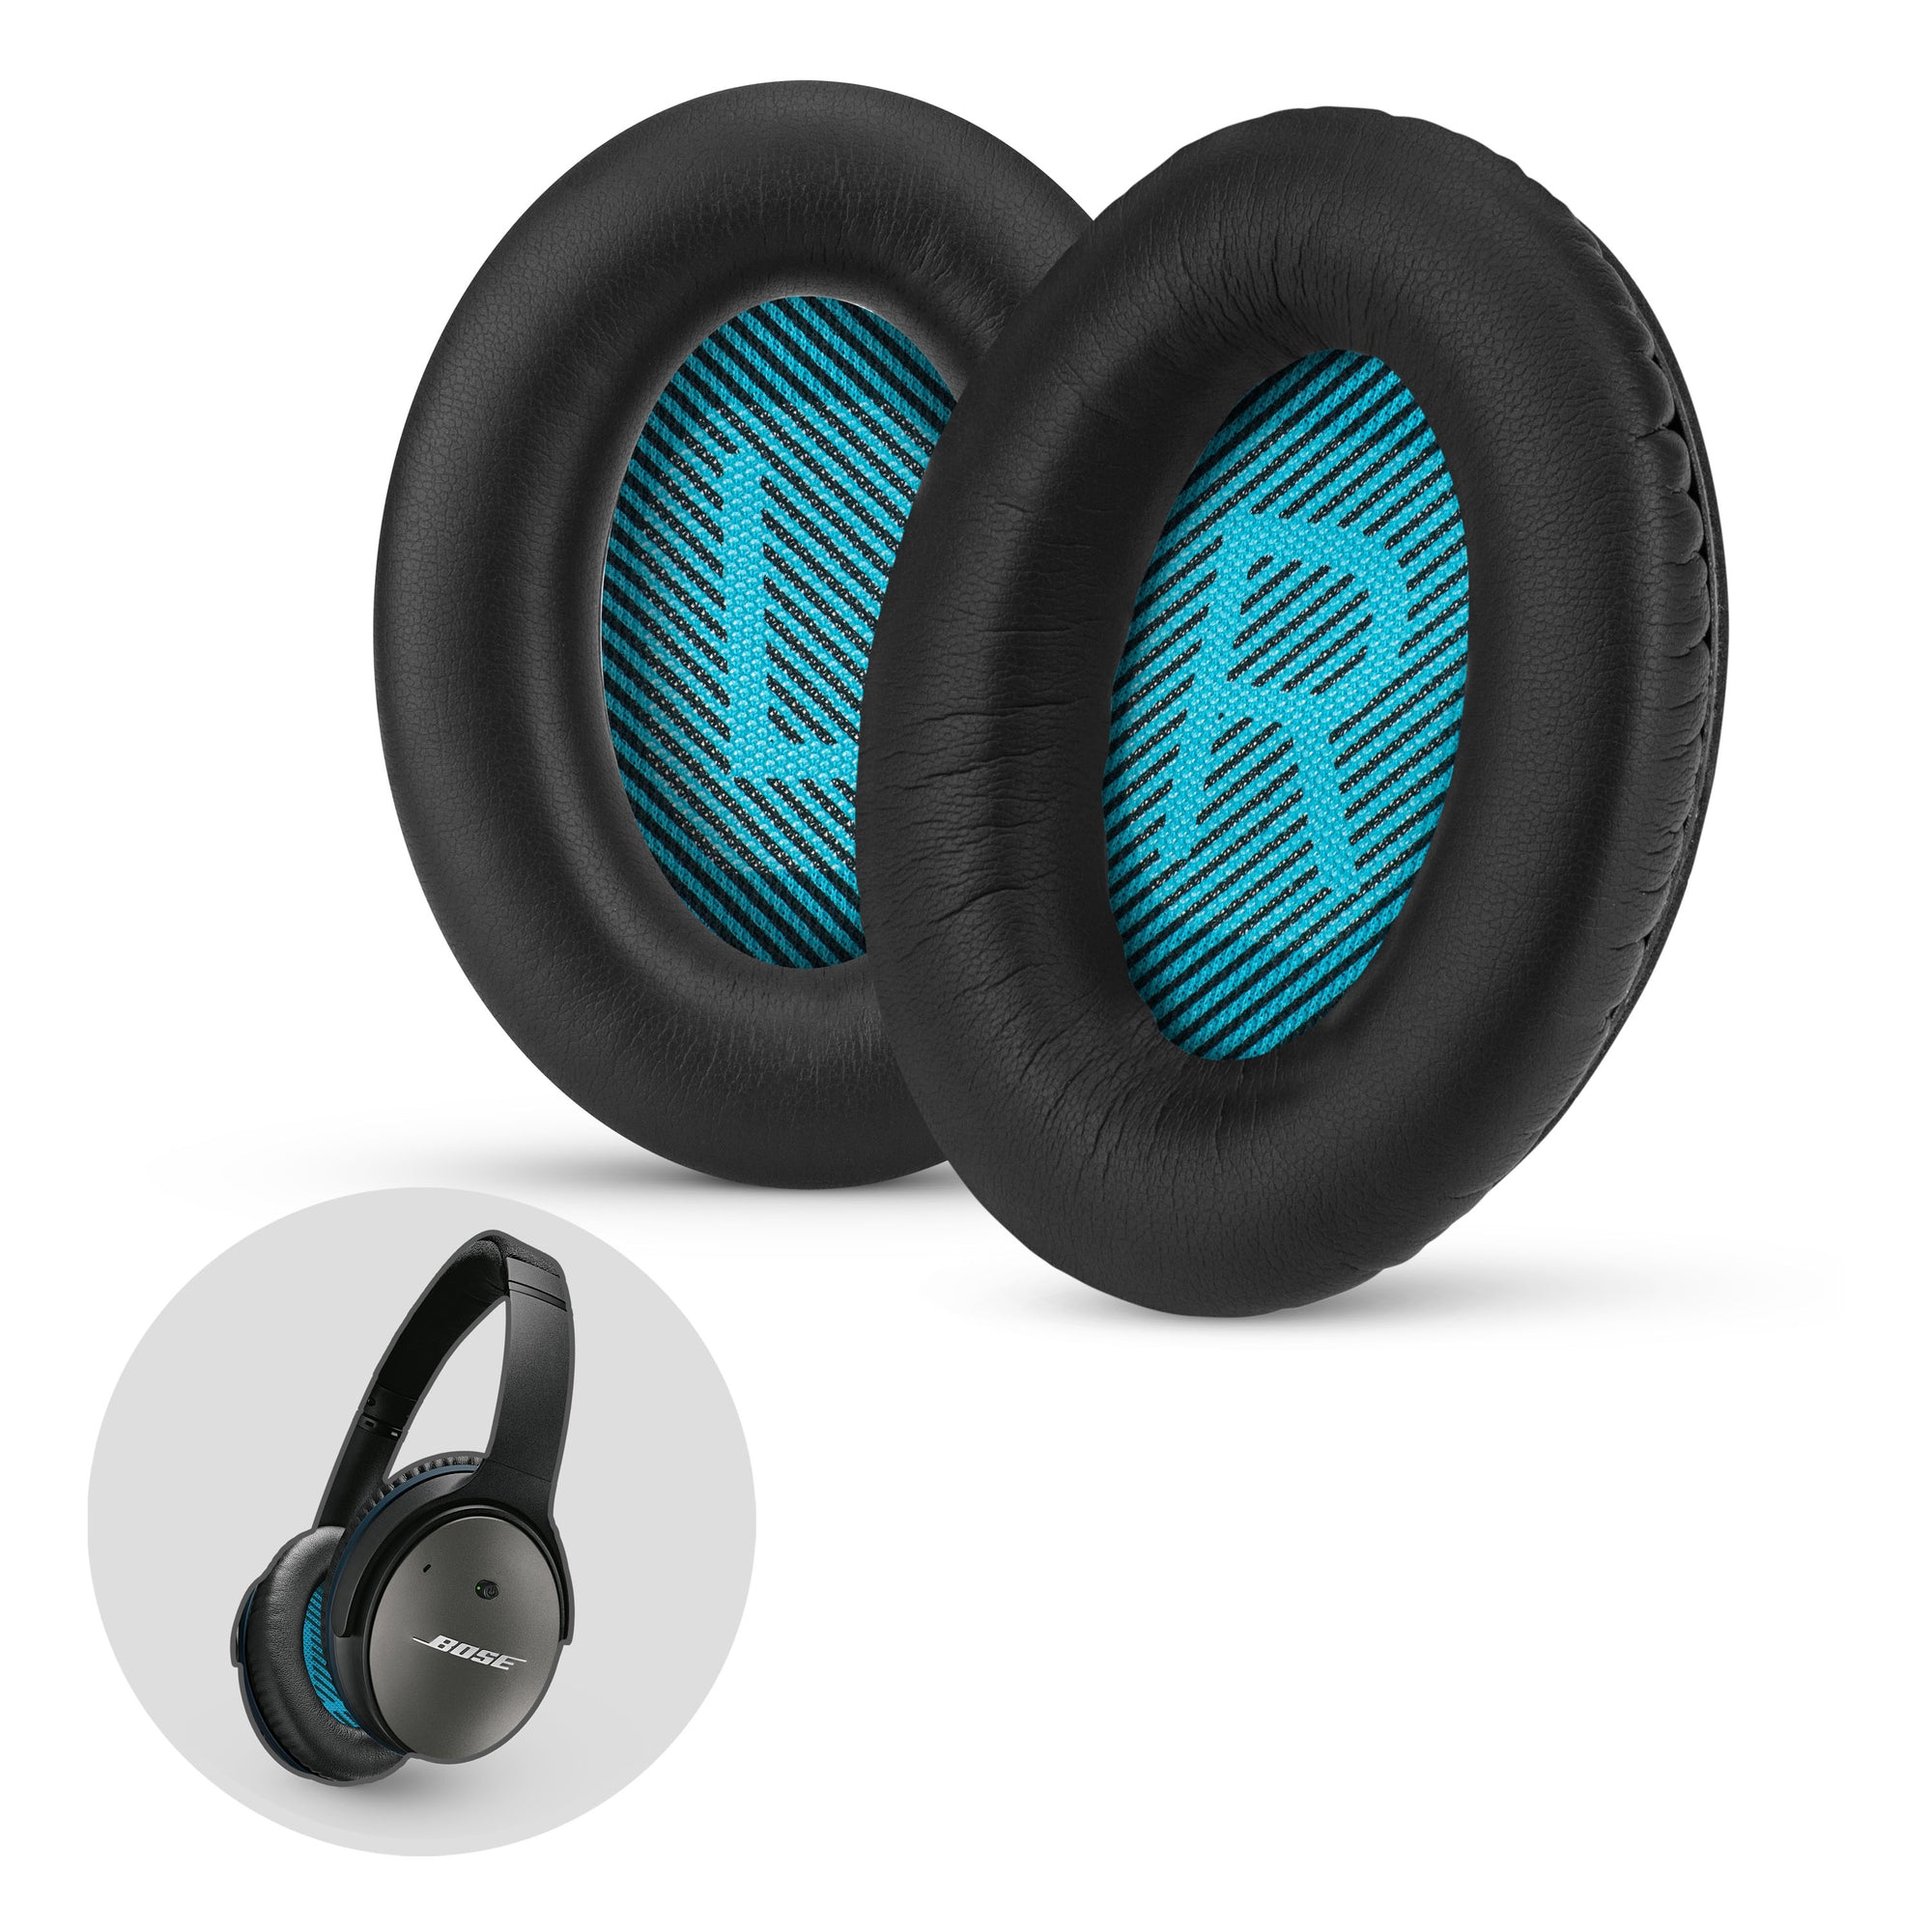 BOSE QC25 Replacement Premium Earpads (Compatible Also With AE2, AE2i, AE2w, SoundLink & SoundTrue)